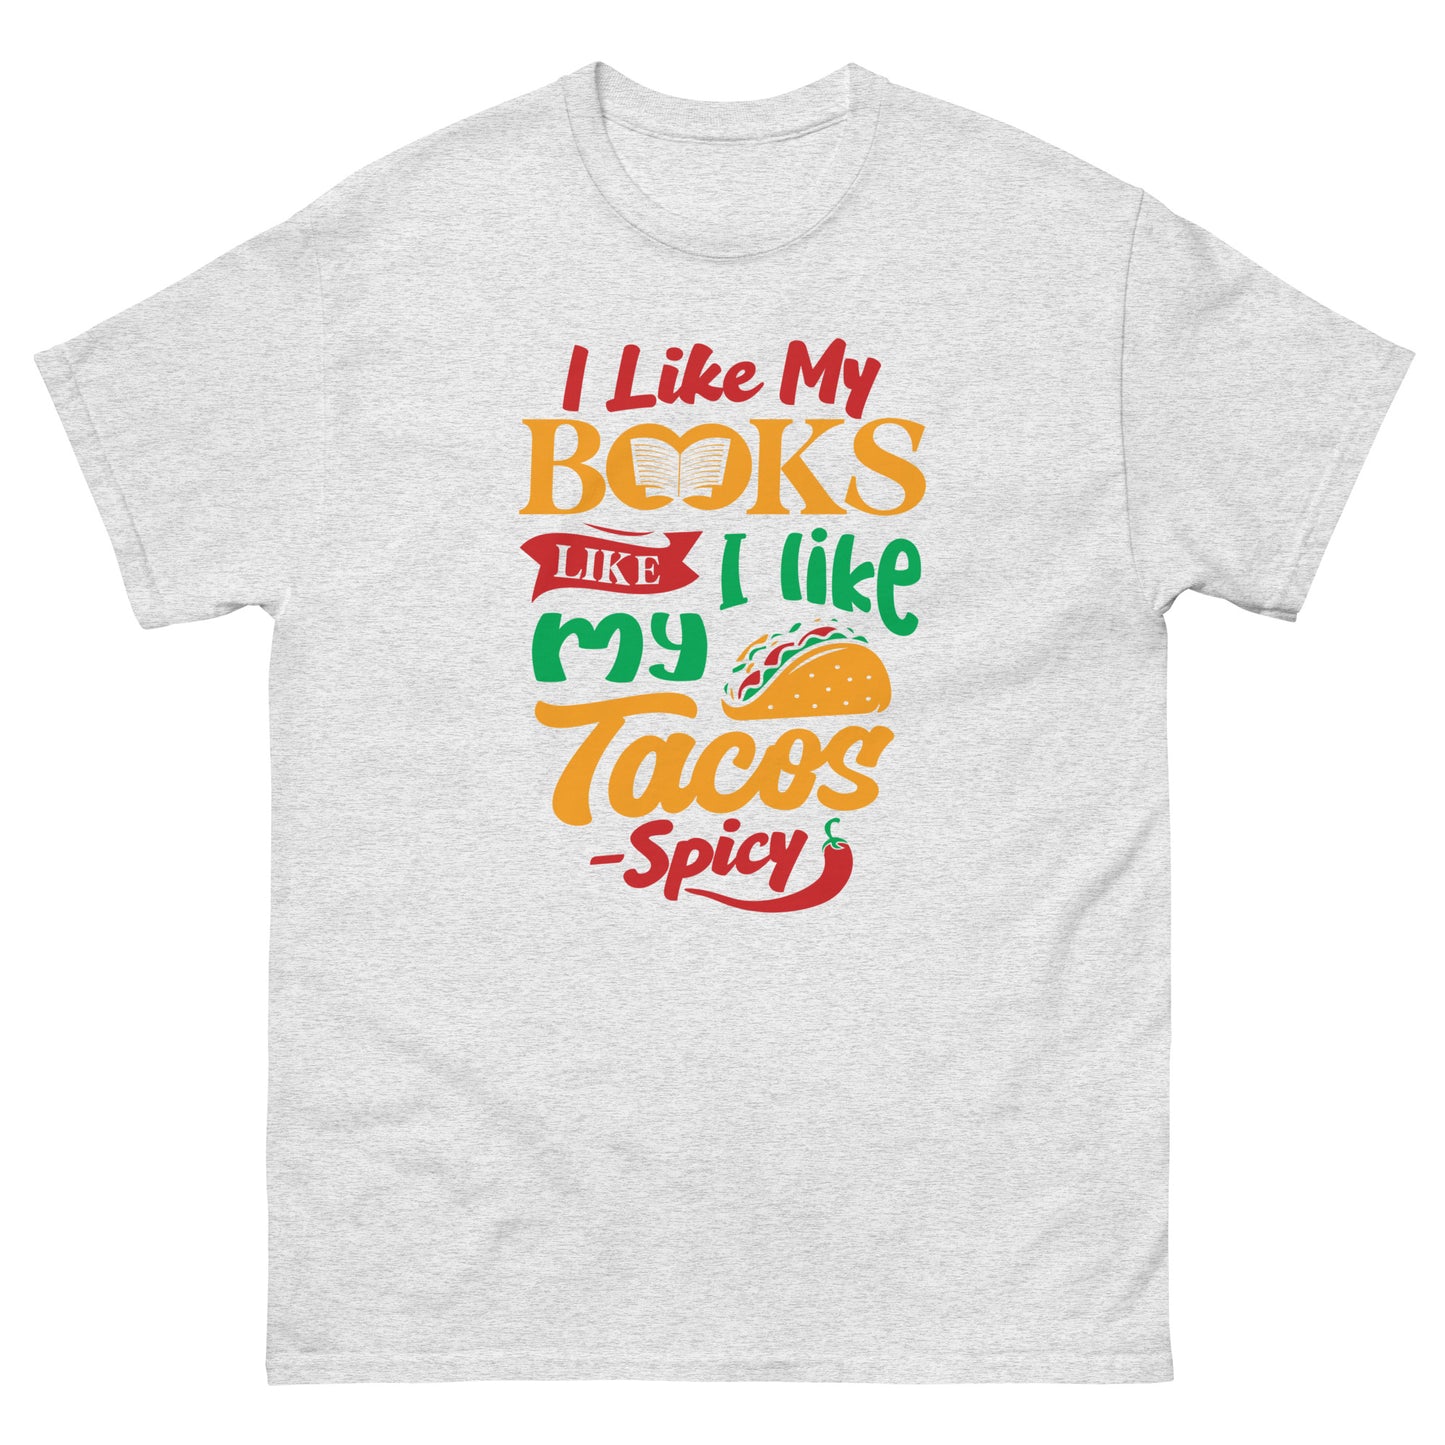 Classic tee - Spicy Tacos